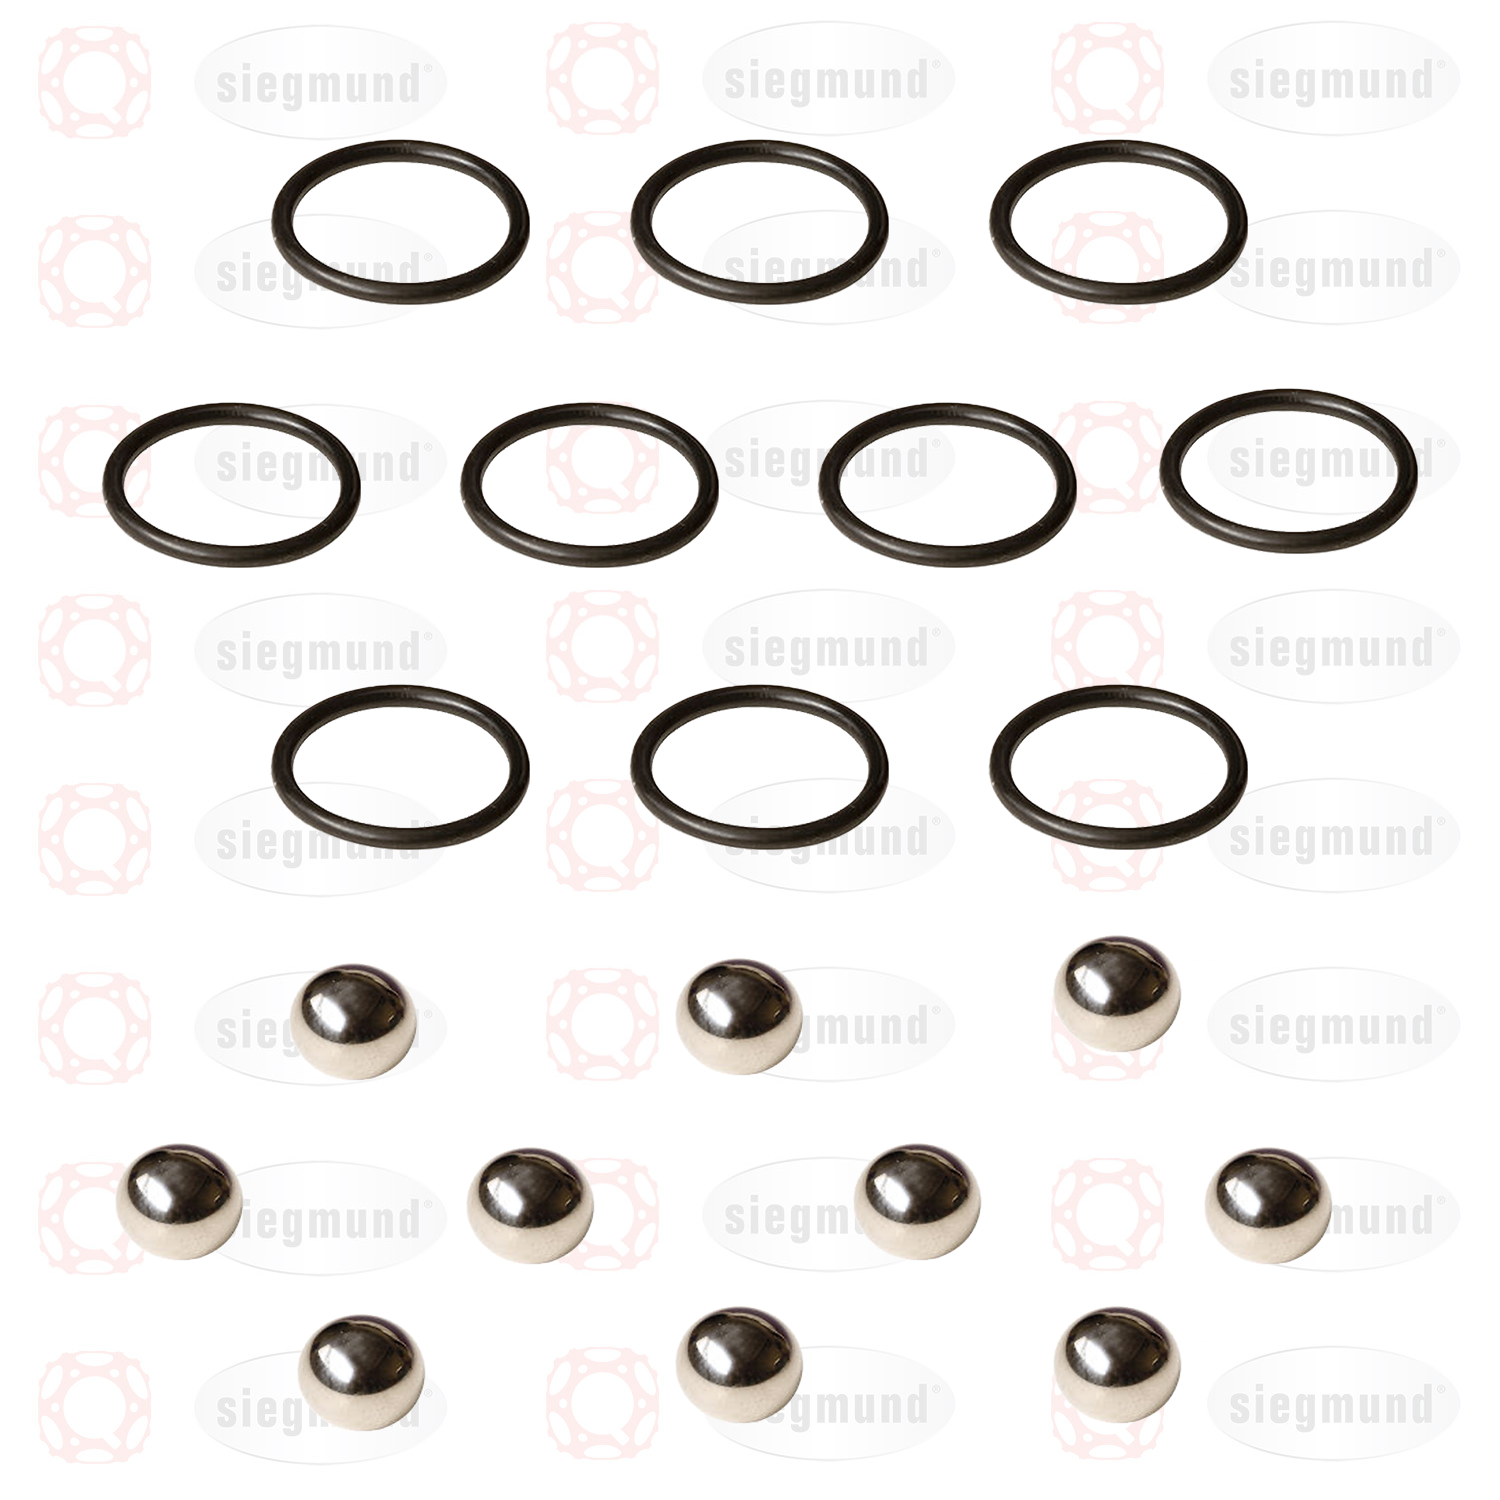 2-289102: O-Rings and Balls Set for the System 28 Clamping Bolts (20 Pieces)